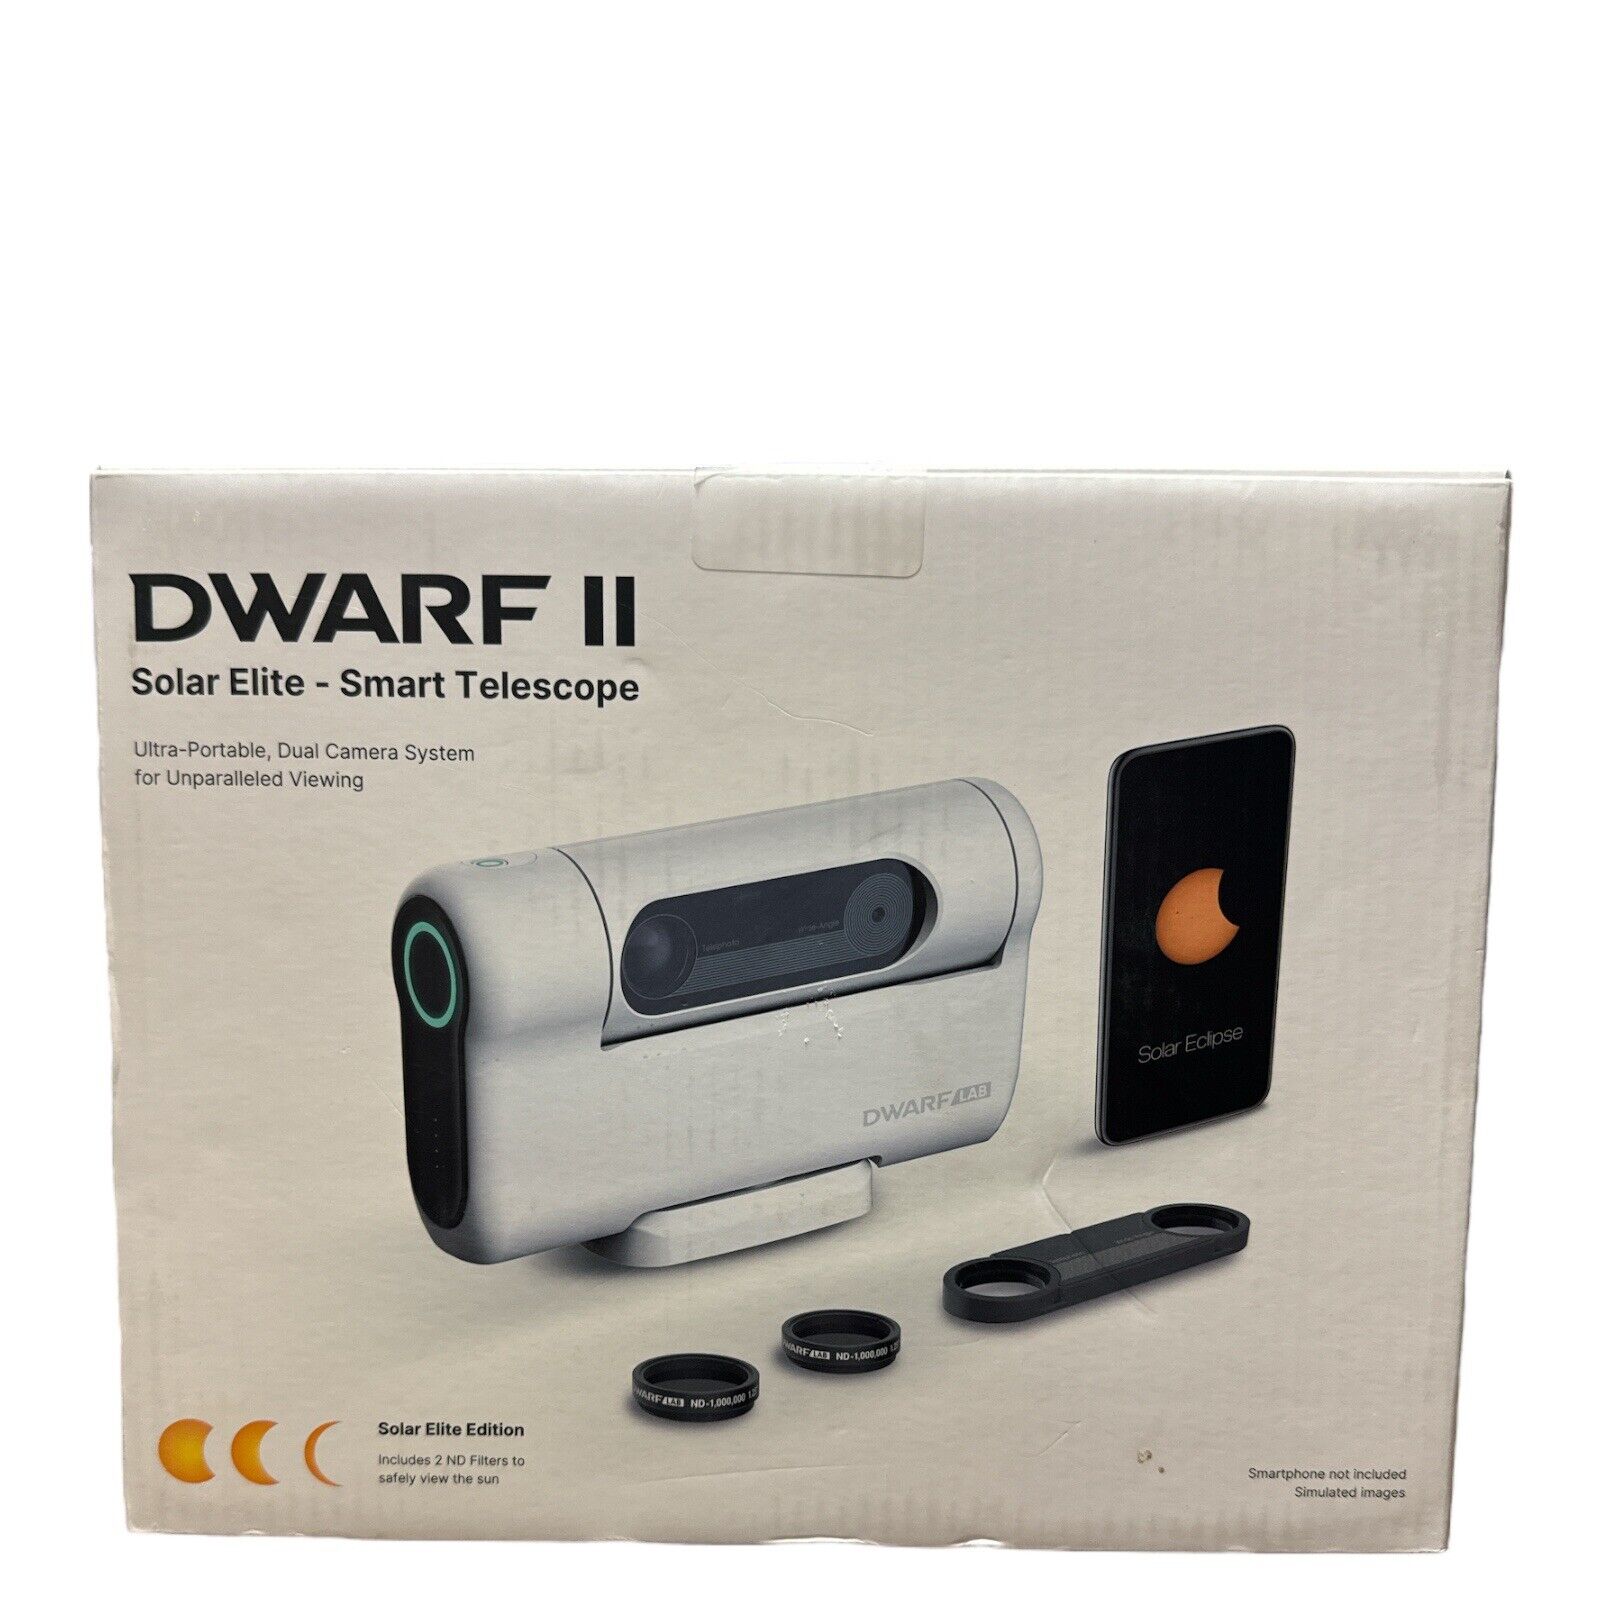 DWARF II Smart Telescope With Solar Filter Solar Elite Edition 2 ND Filters